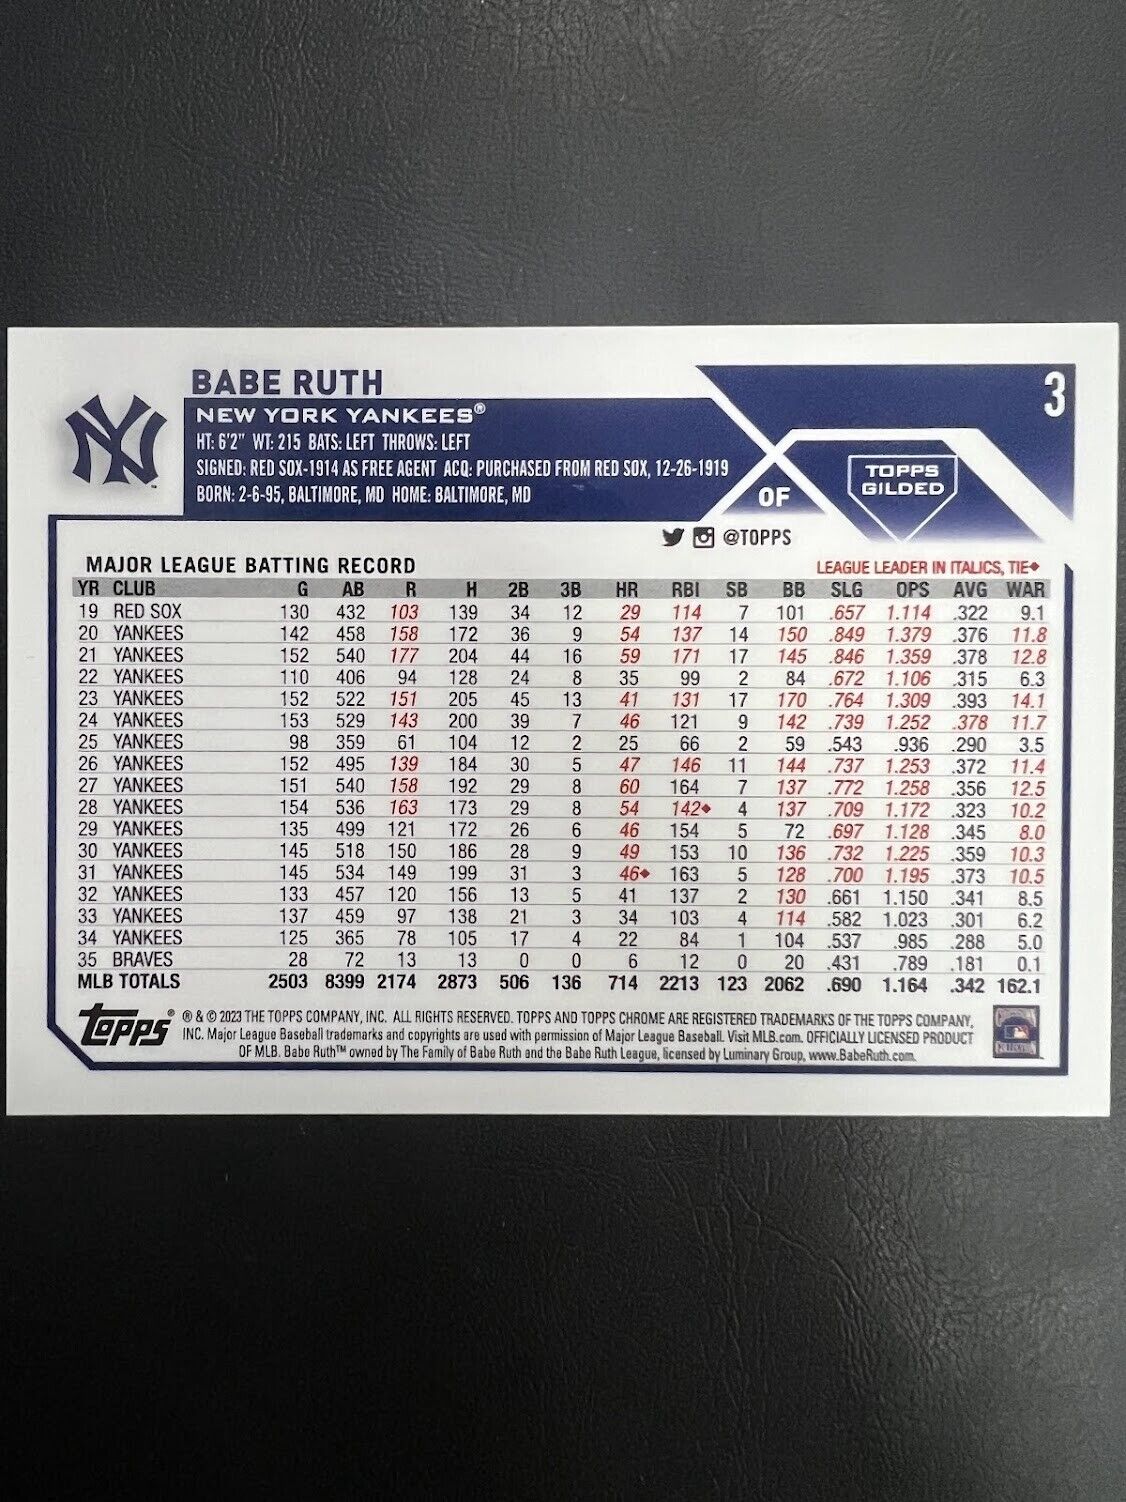 2023 Topps Gilded Babe Ruth 46/99 SP No 3 New York Yankees J